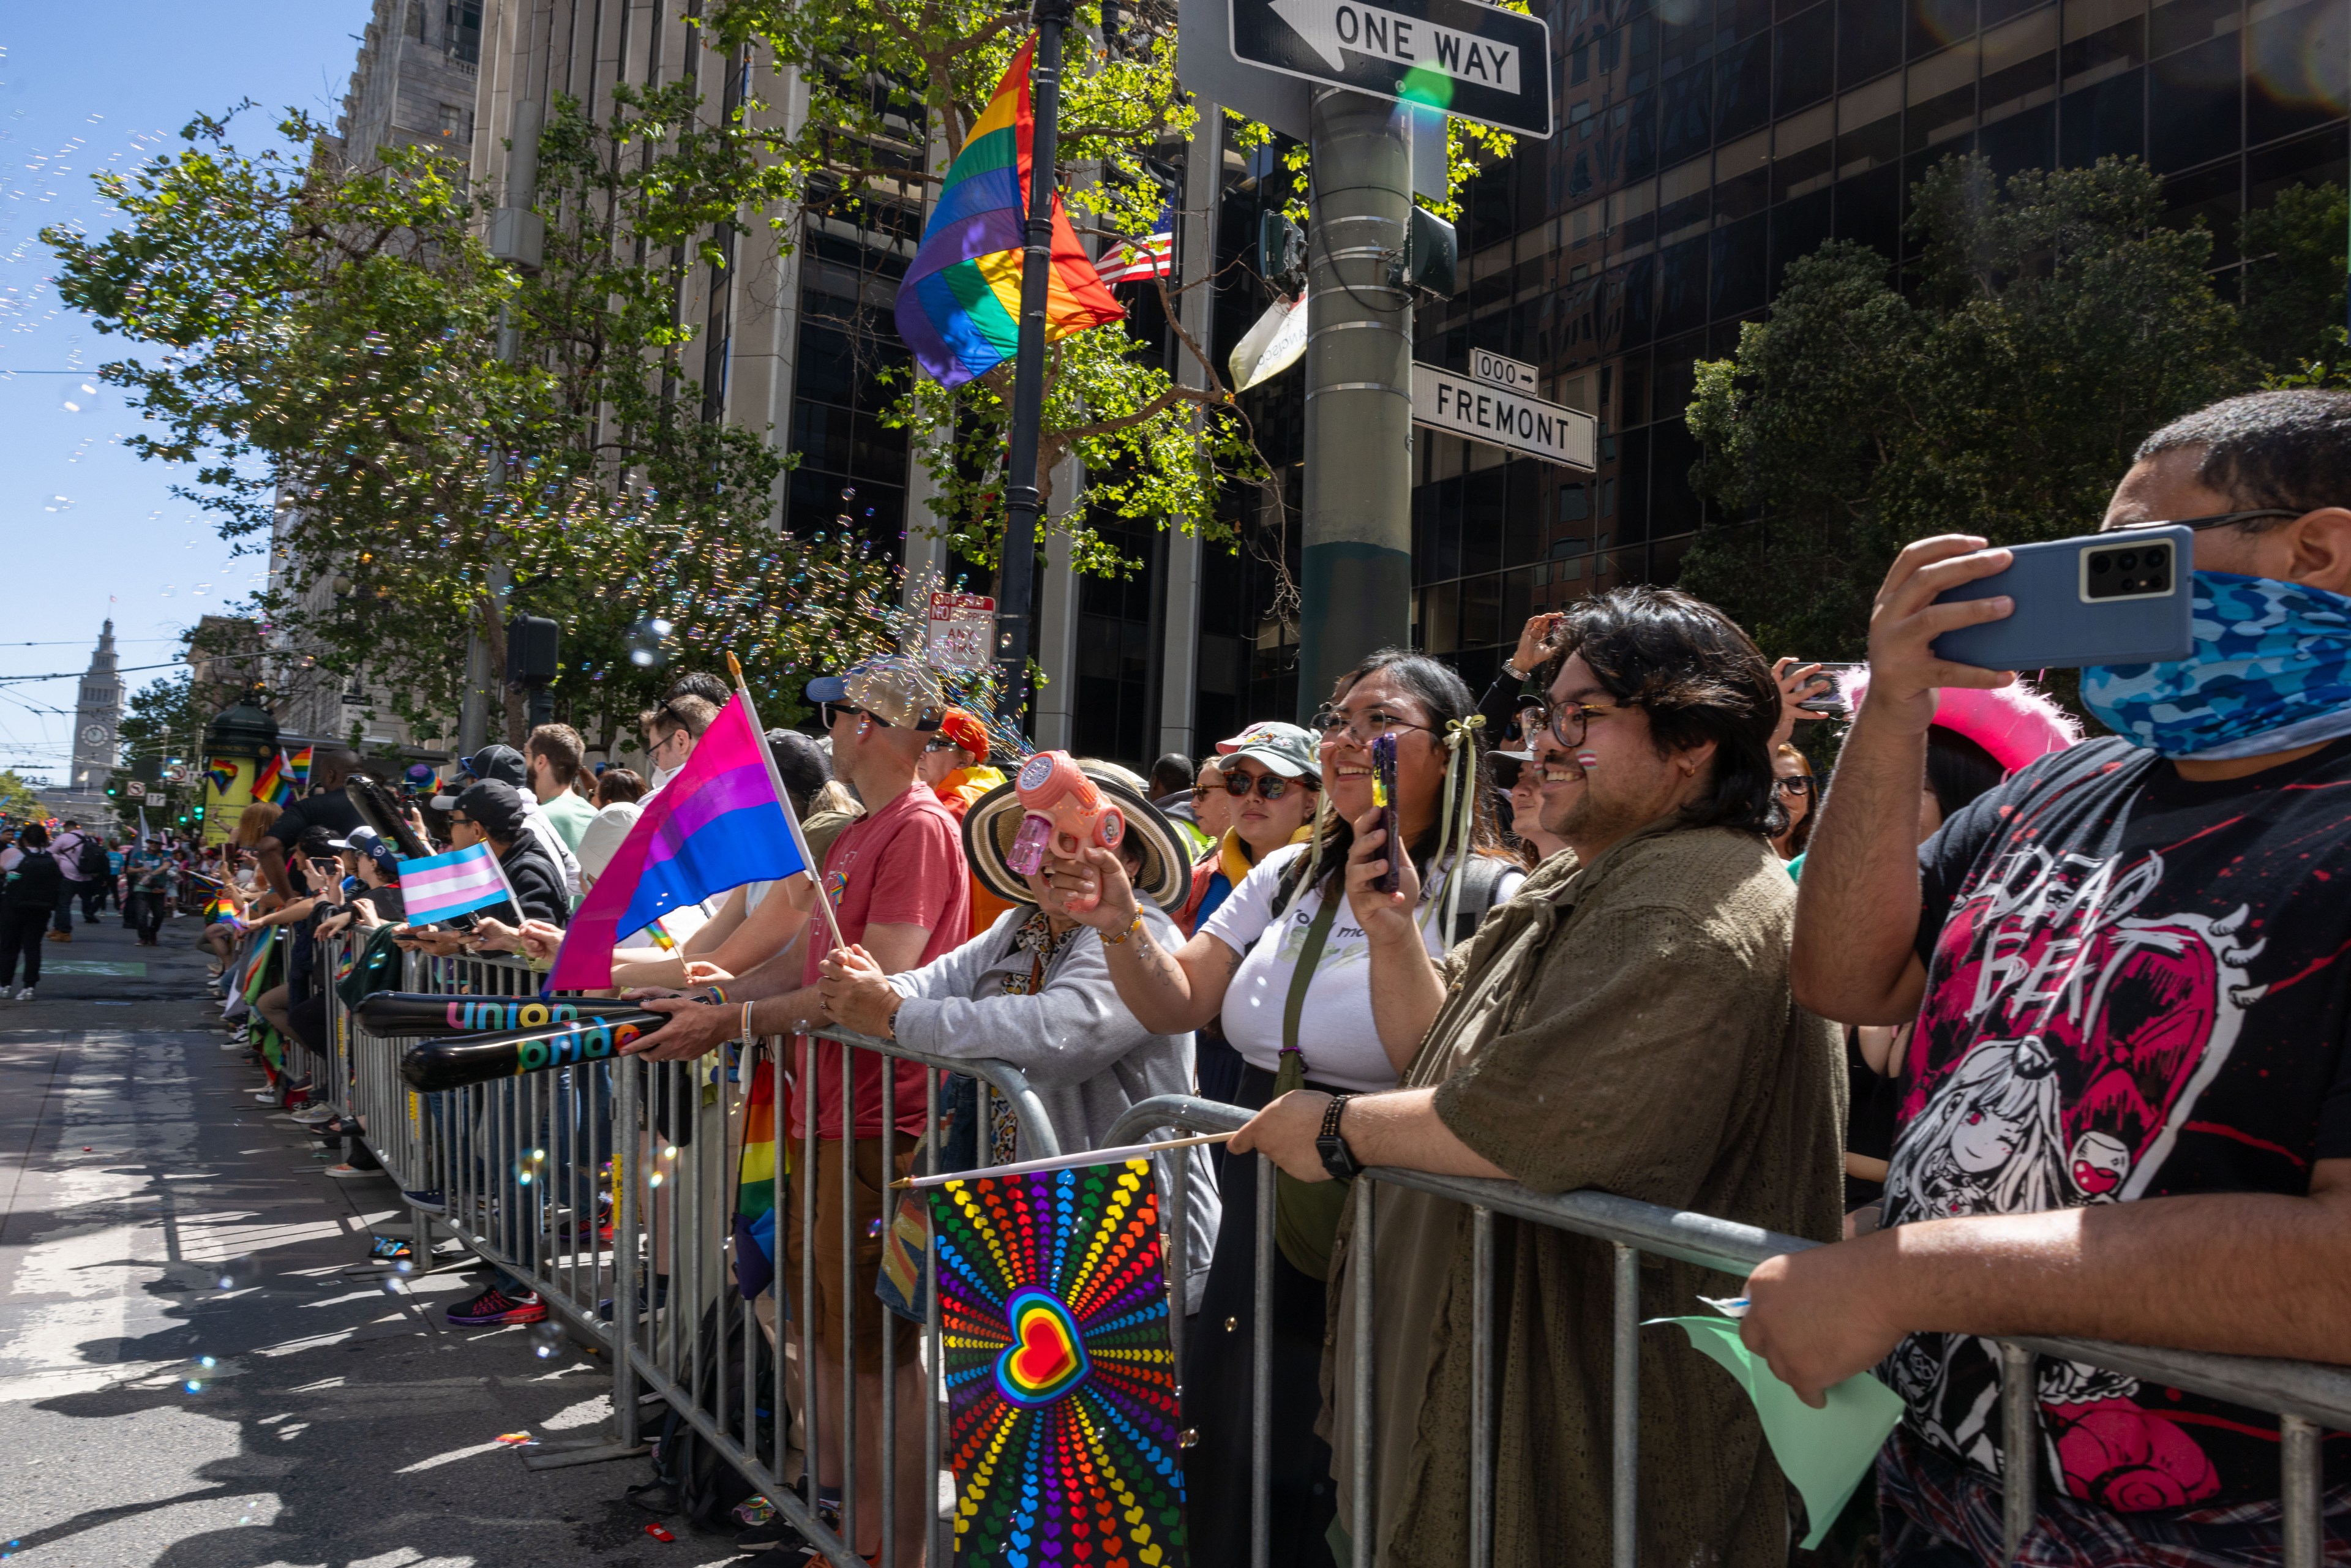 The image shows a diverse crowd cheering and holding various pride flags at a parade, with buildings and trees in the background, and street signs visible.